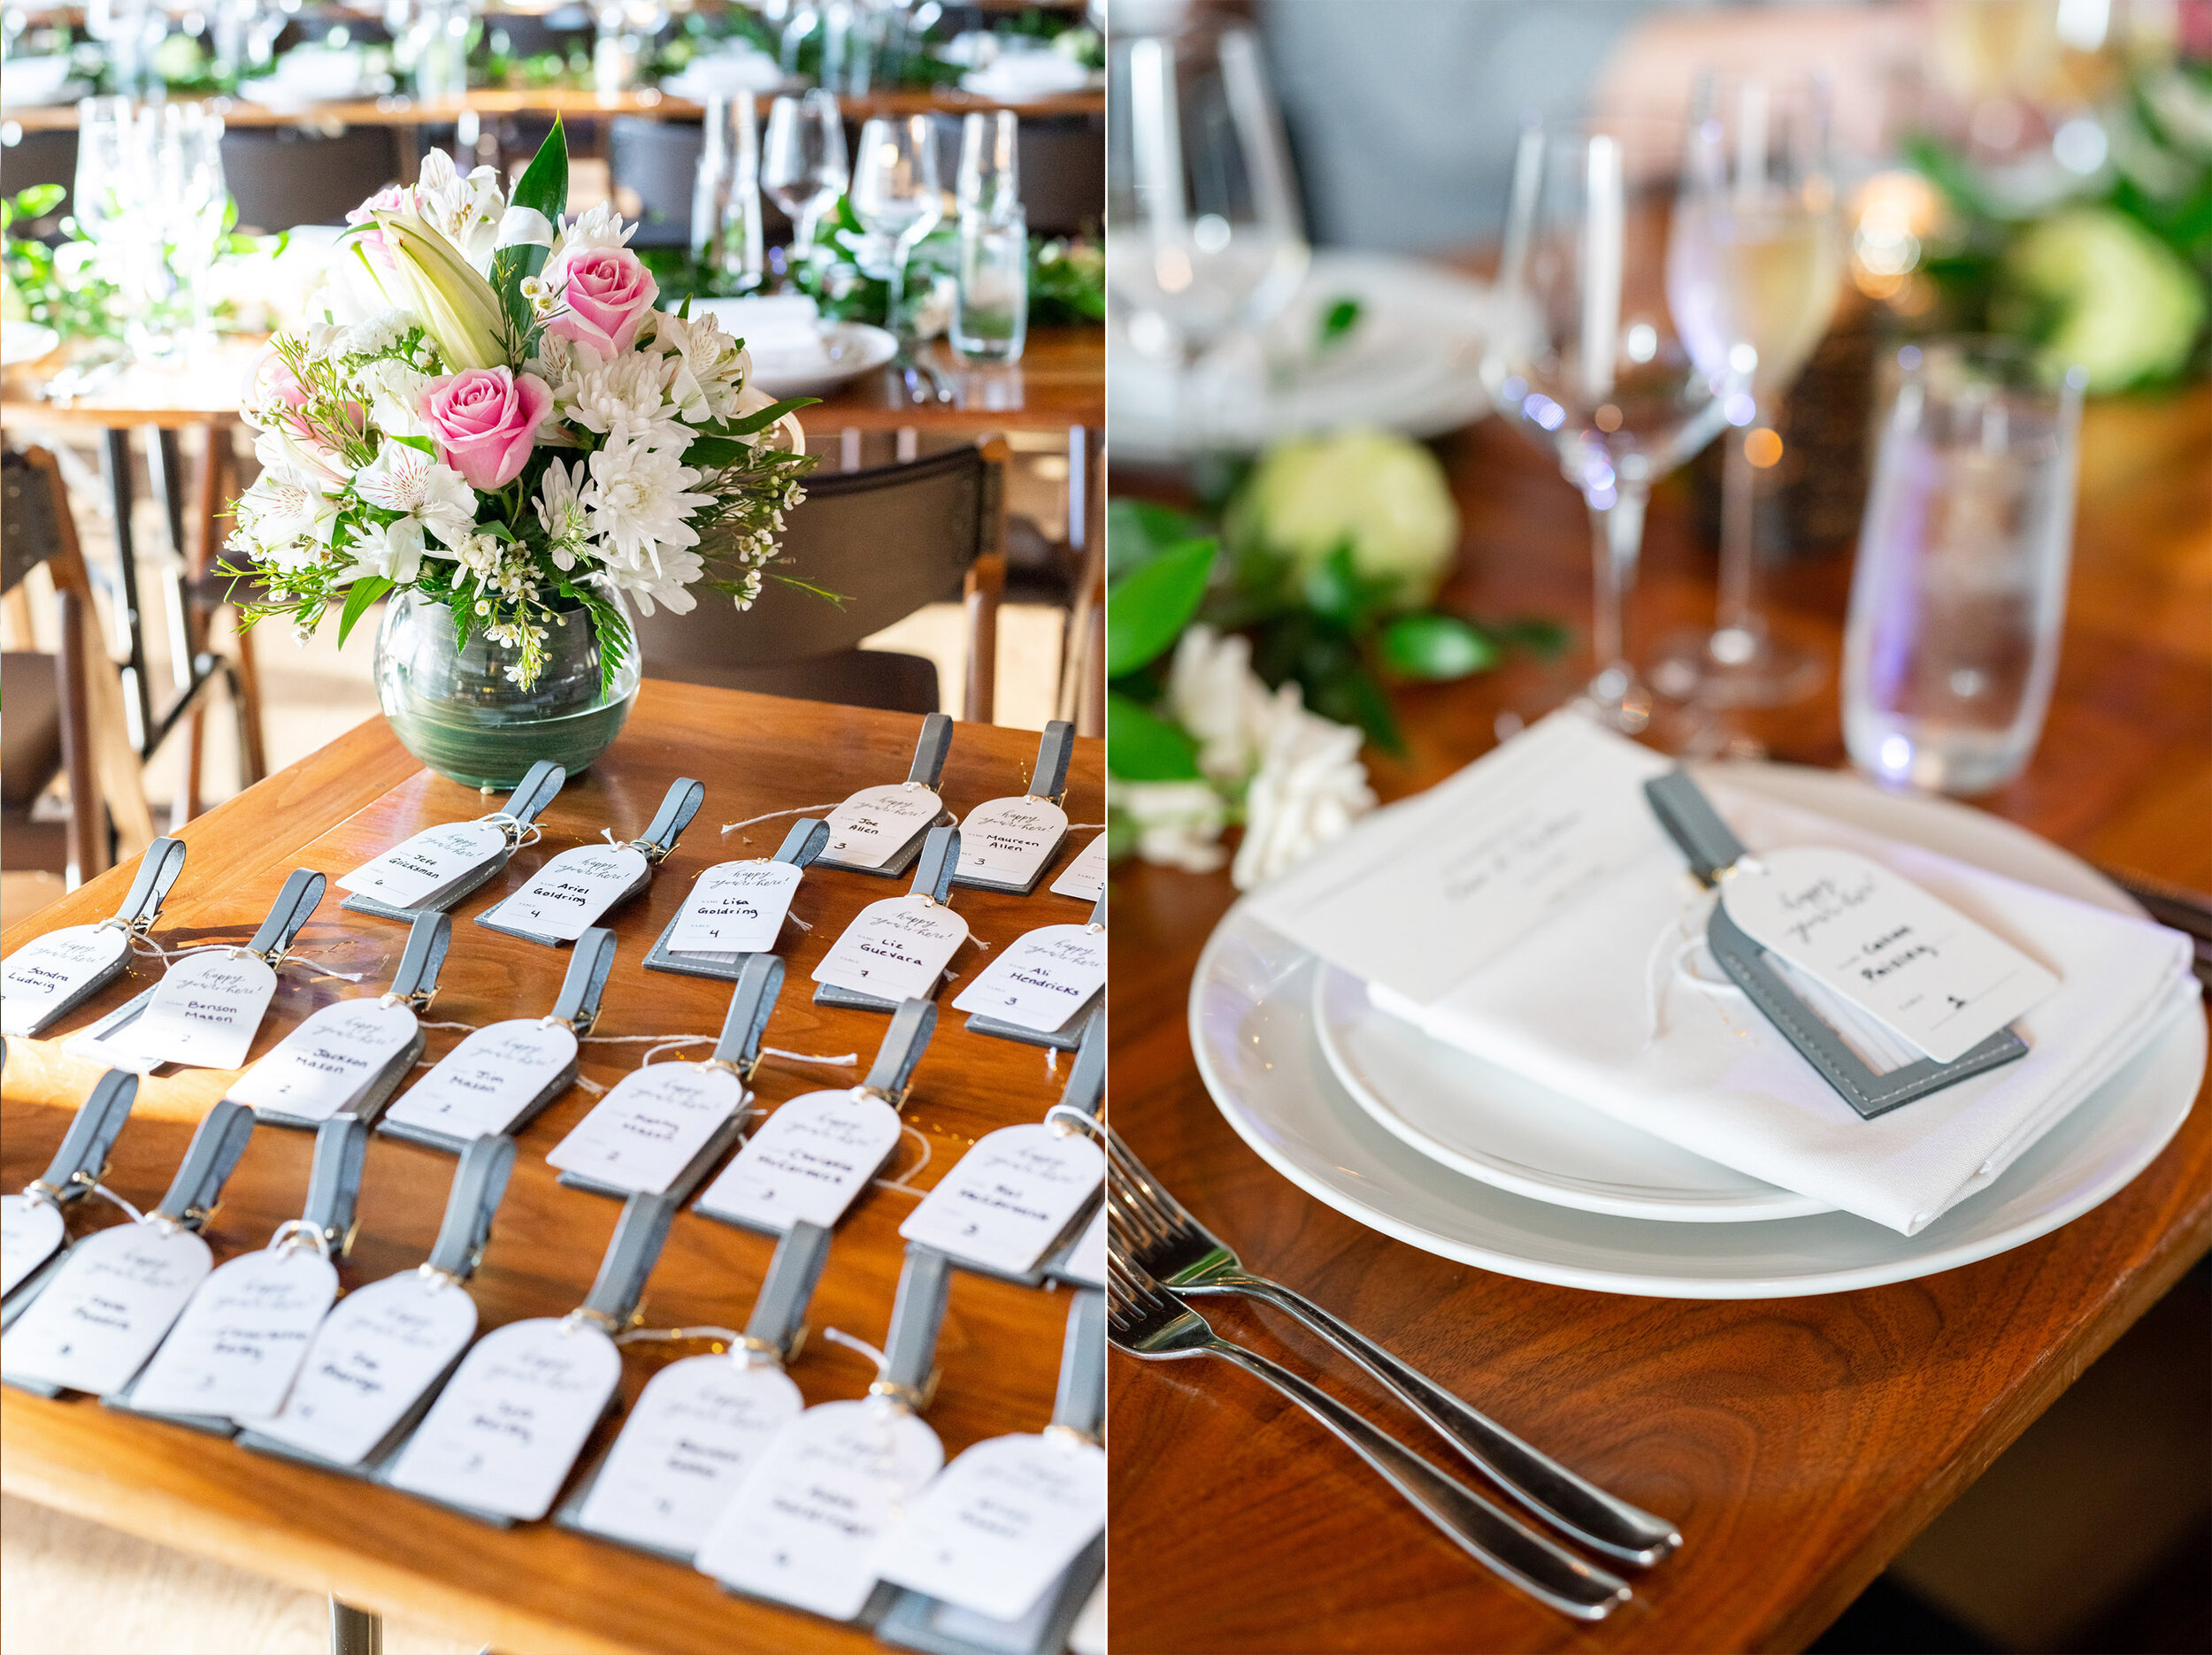 Luggage tag wedding favors at District Winery table set up